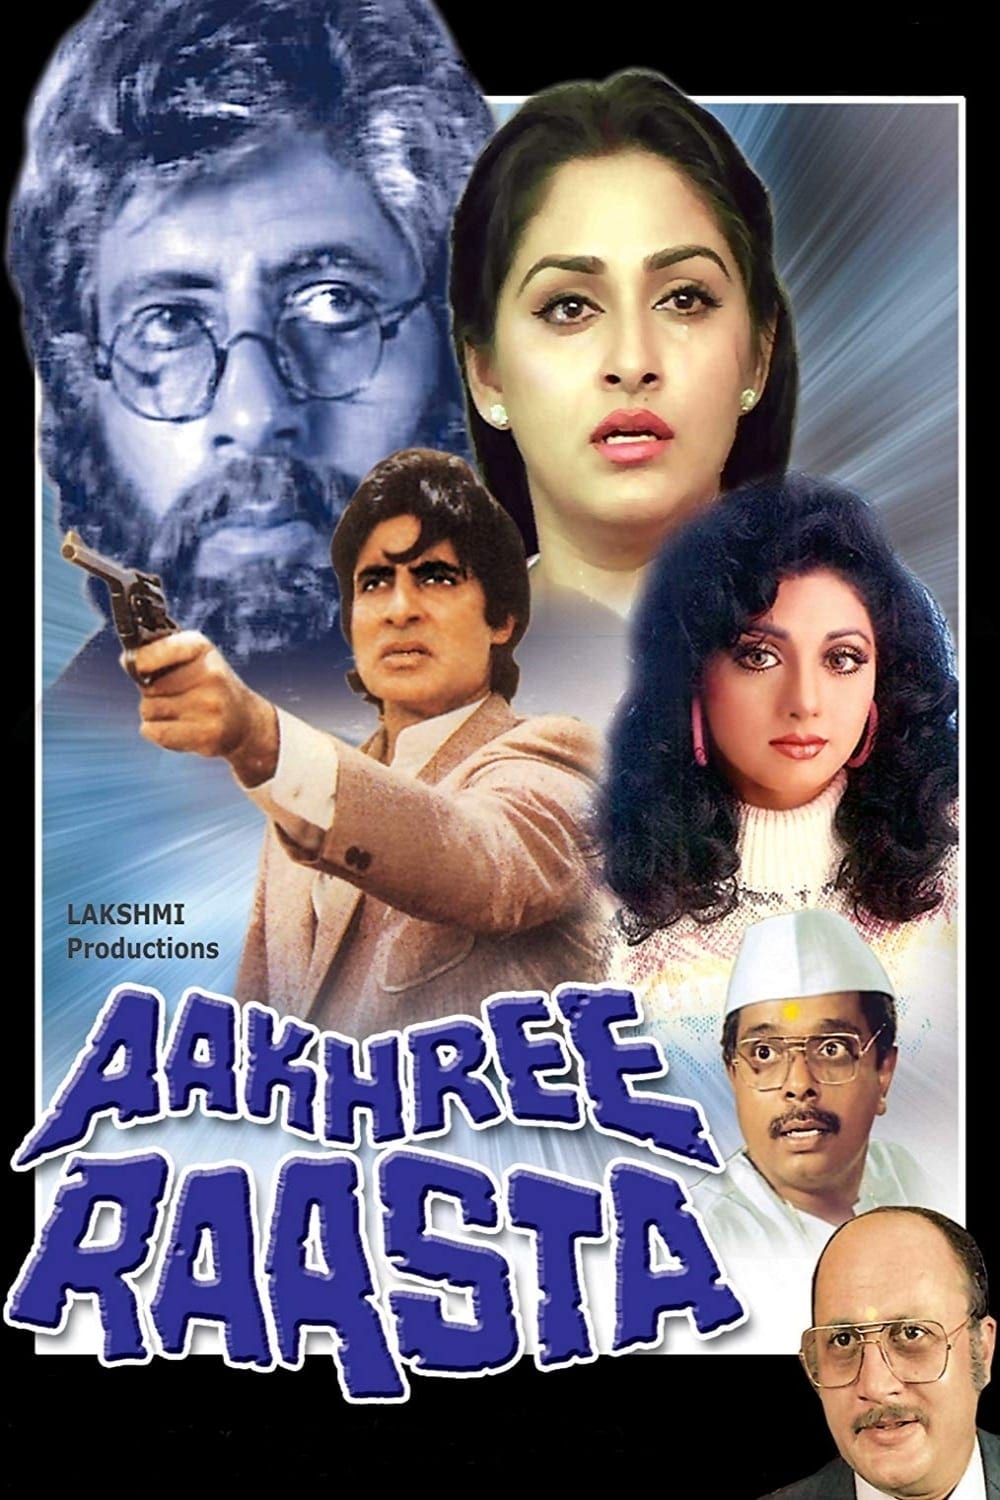 Poster for the movie "Aakhree Raasta"